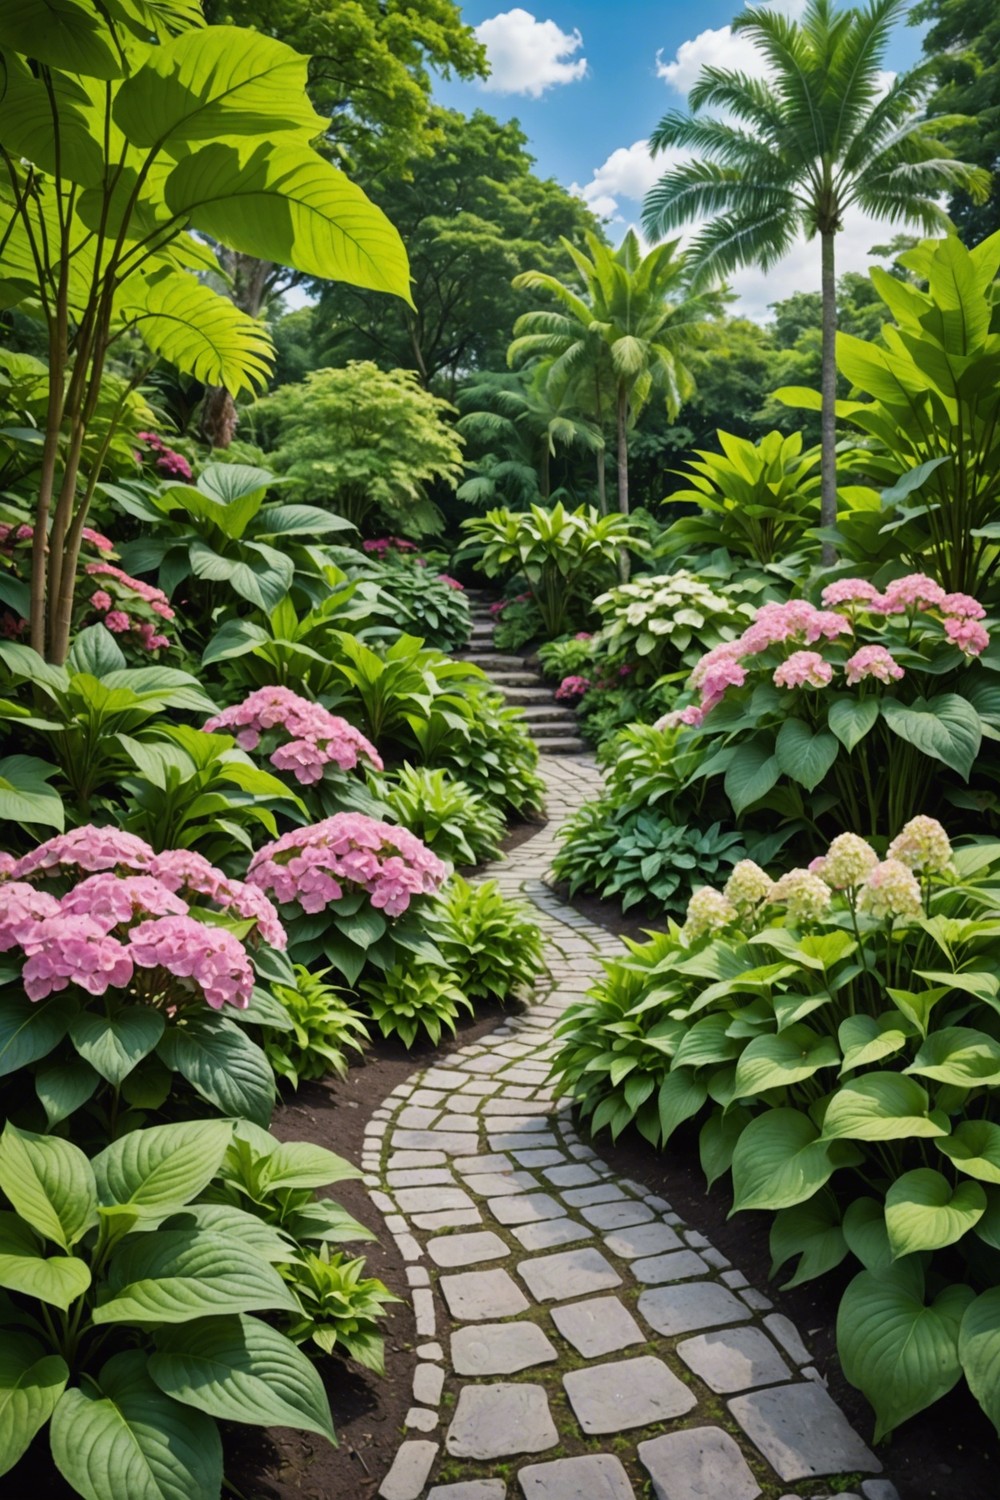 Tropical Oasis with Pink Hydrangeas and Patterned Hostas